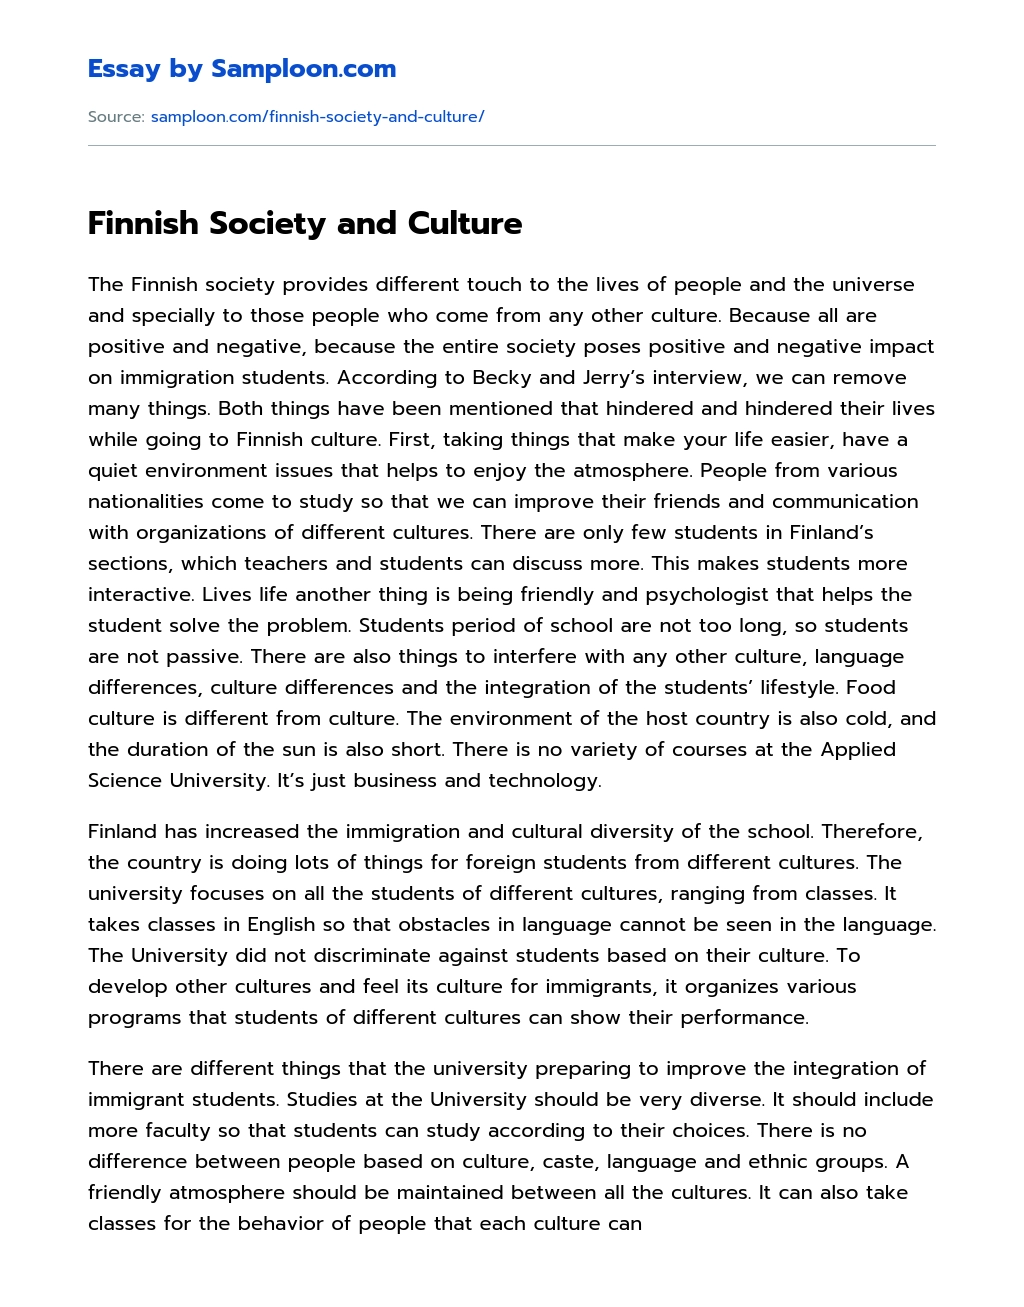 Finnish Society and Culture essay